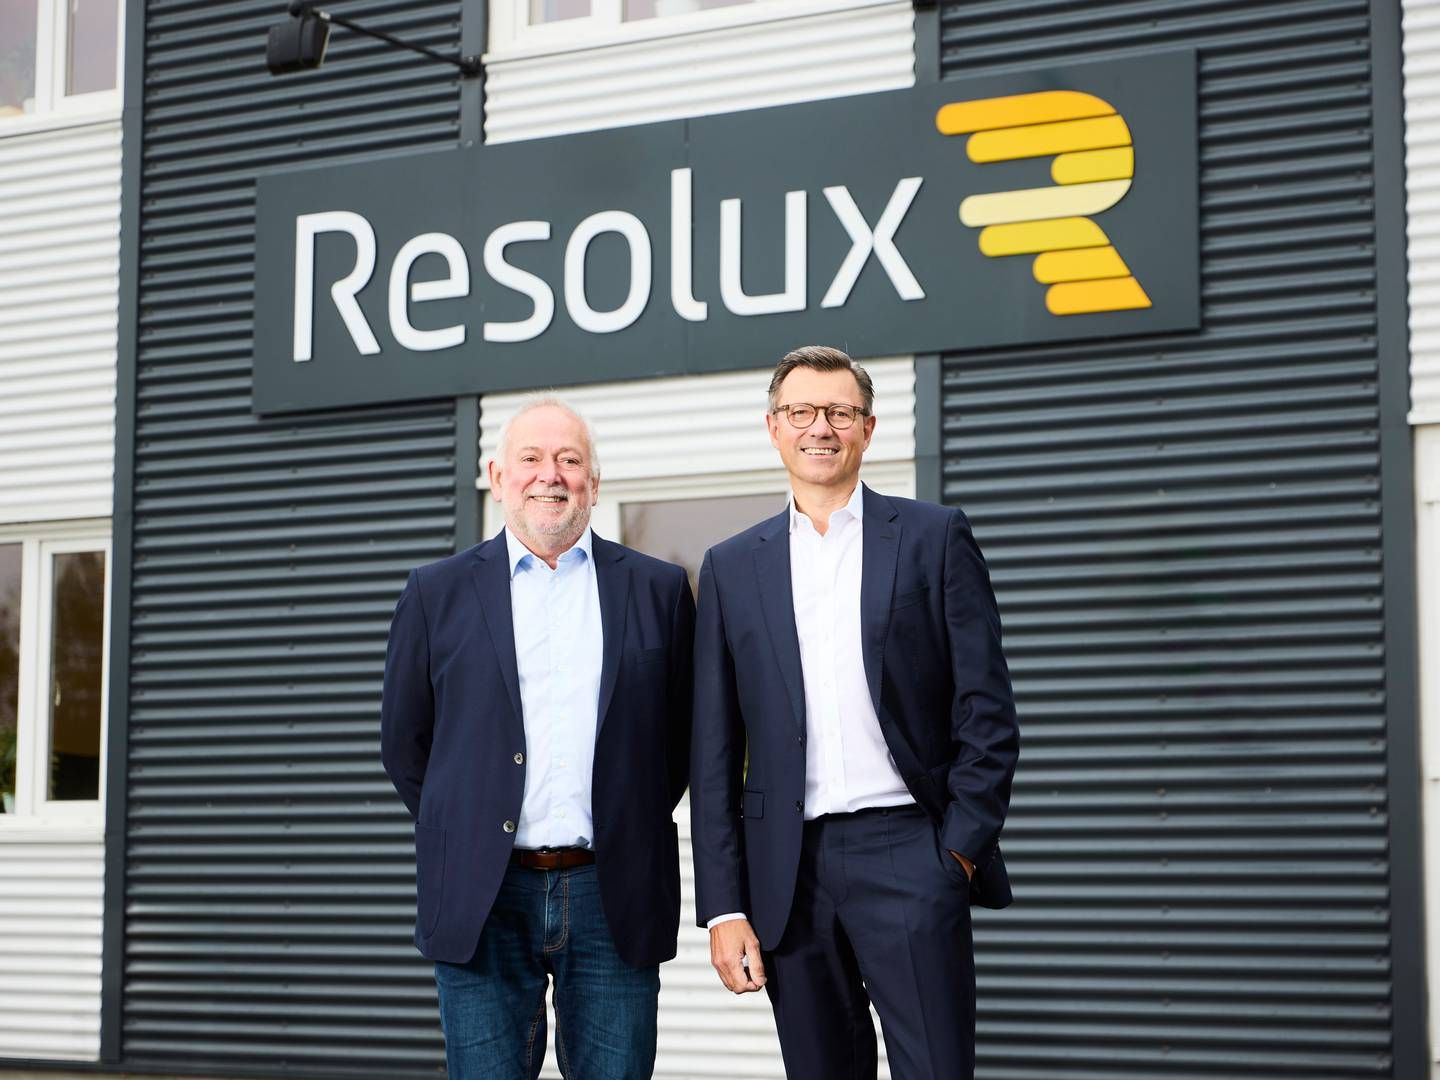 ”I see great potential for Resolux’s services, even though the wind turbine industry is currently under pressure," says the new chief exec. | Photo: Pr Resolux